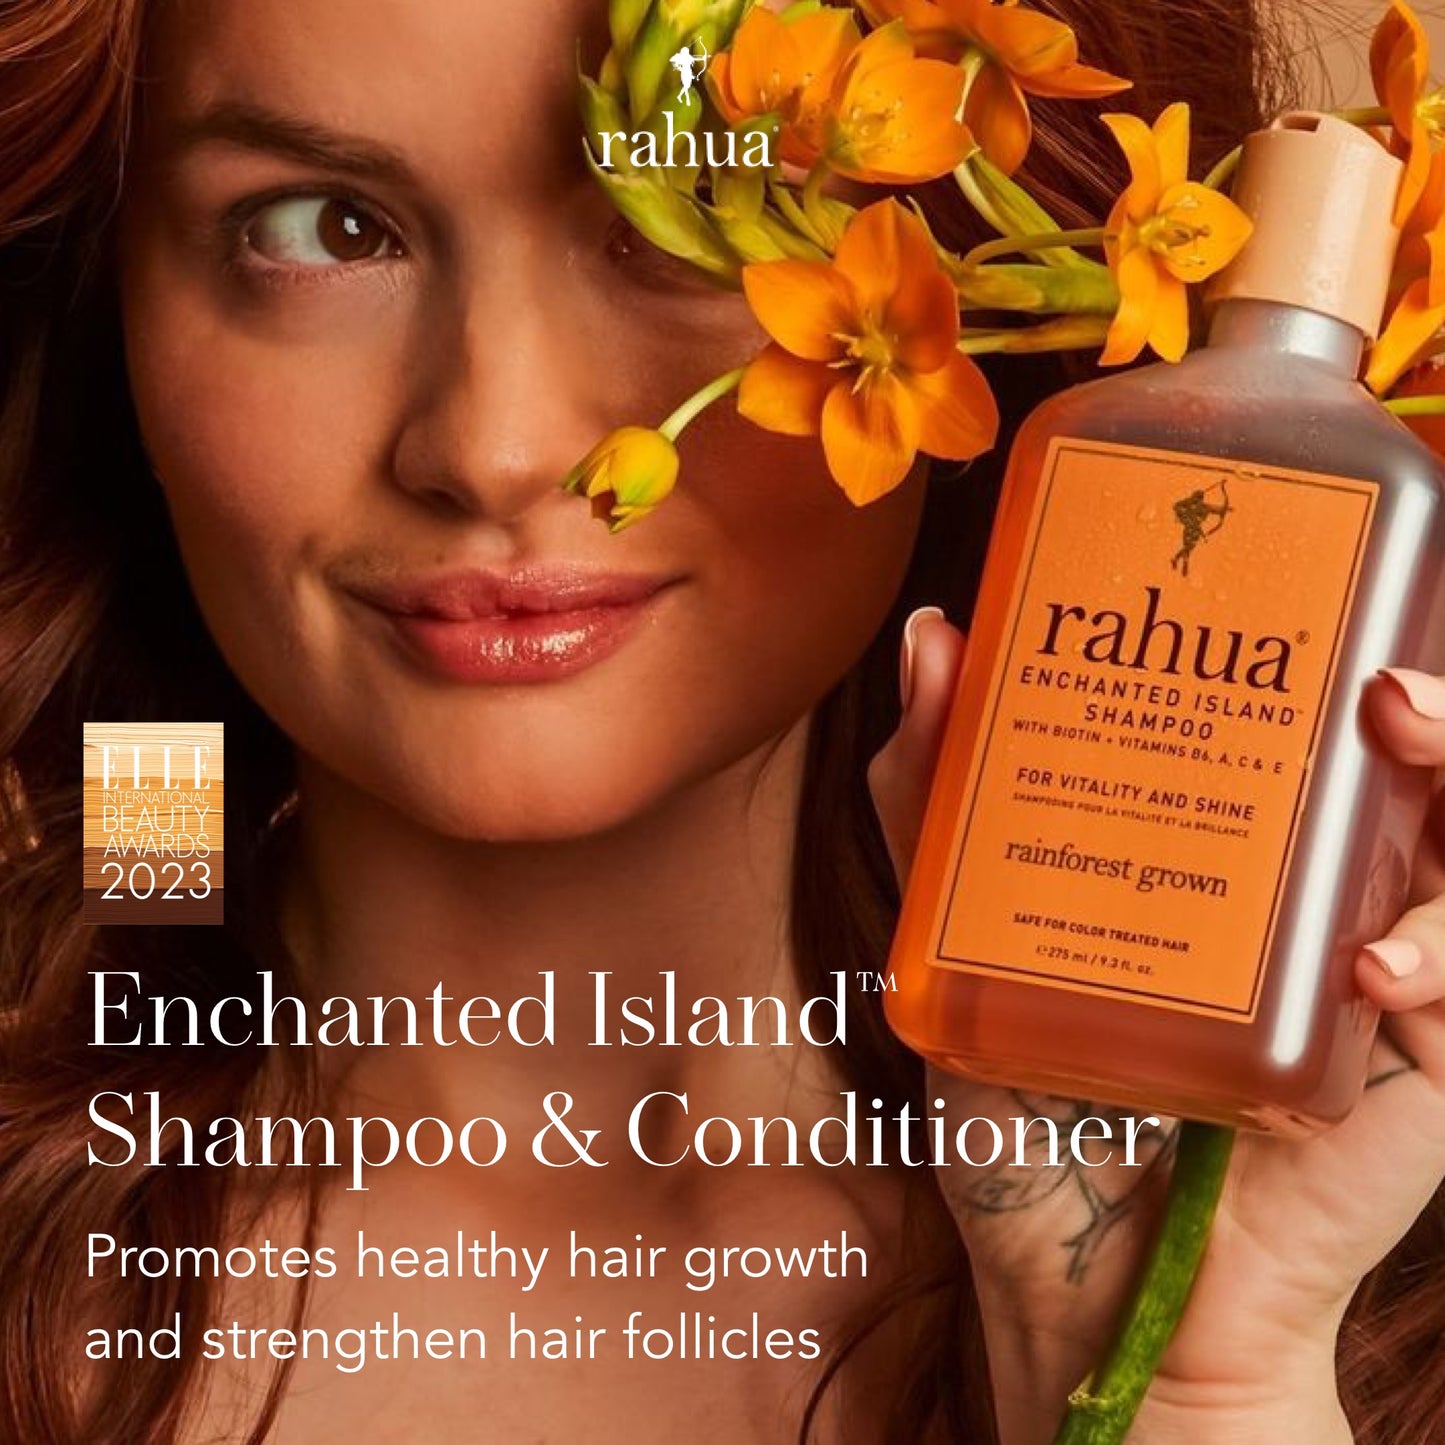 woman holding Rahua enchanted island shampoo and conditioner bottle with flowers